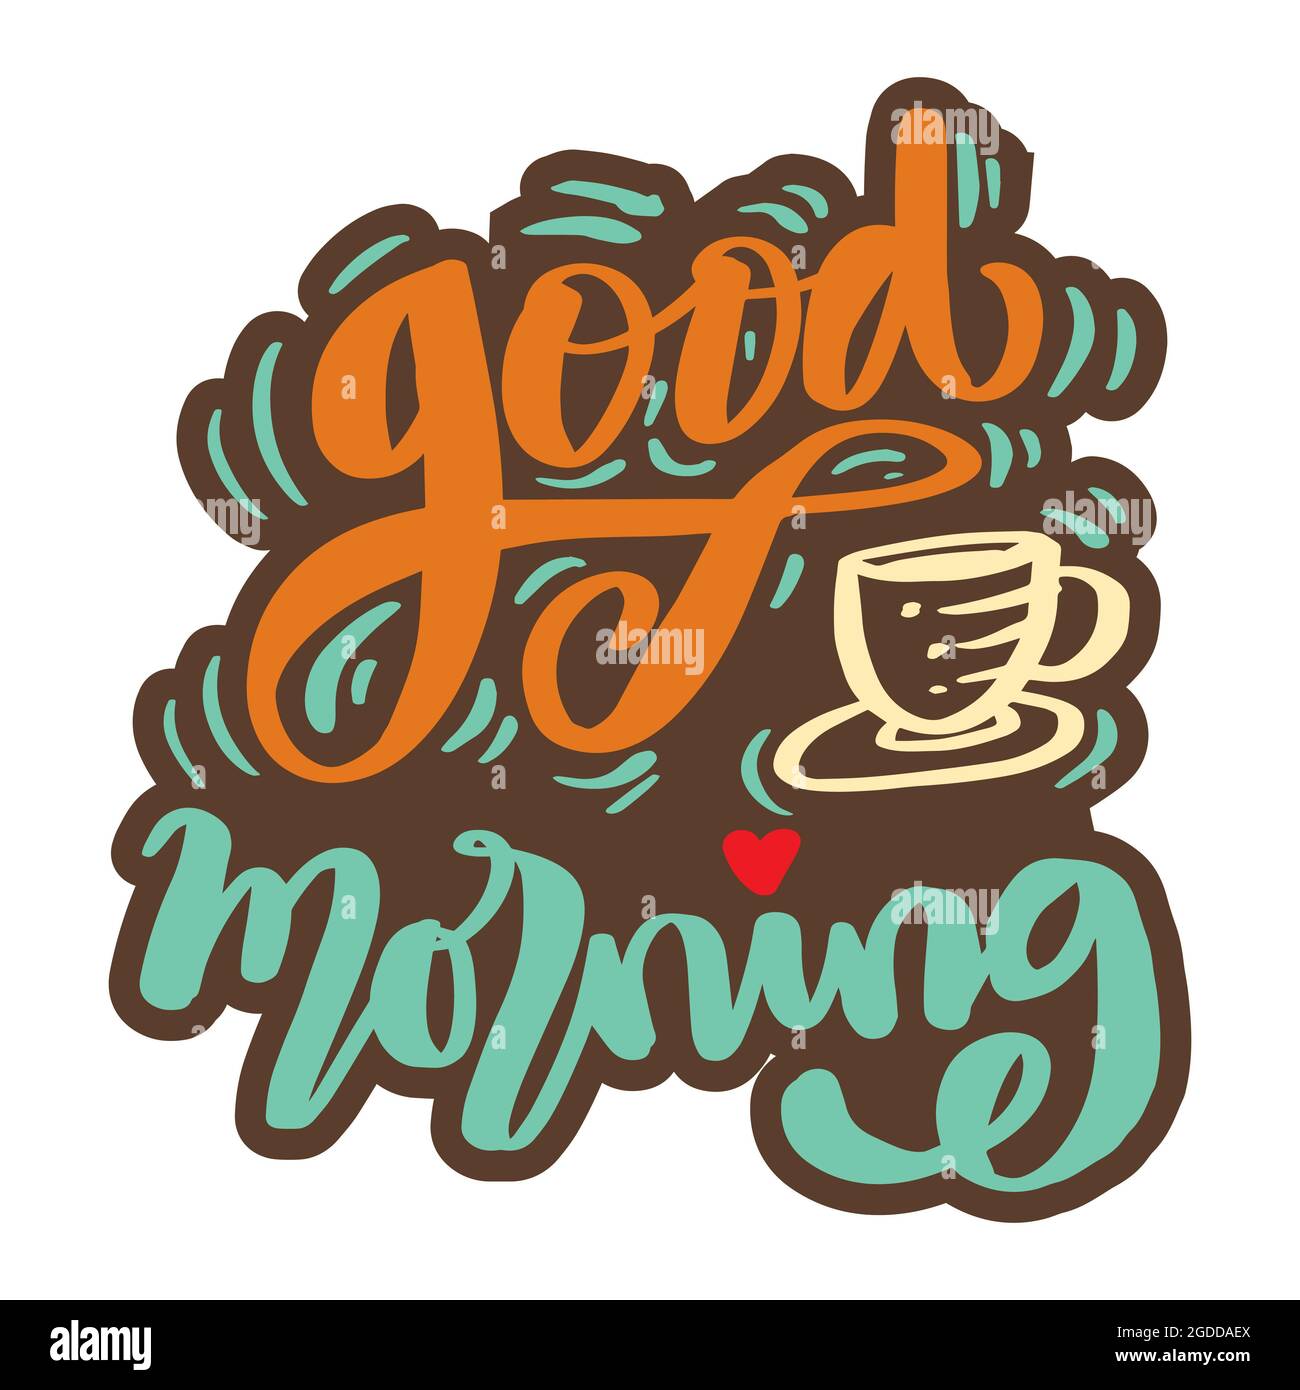 Good morning Cut Out Stock Images & Pictures - Alamy